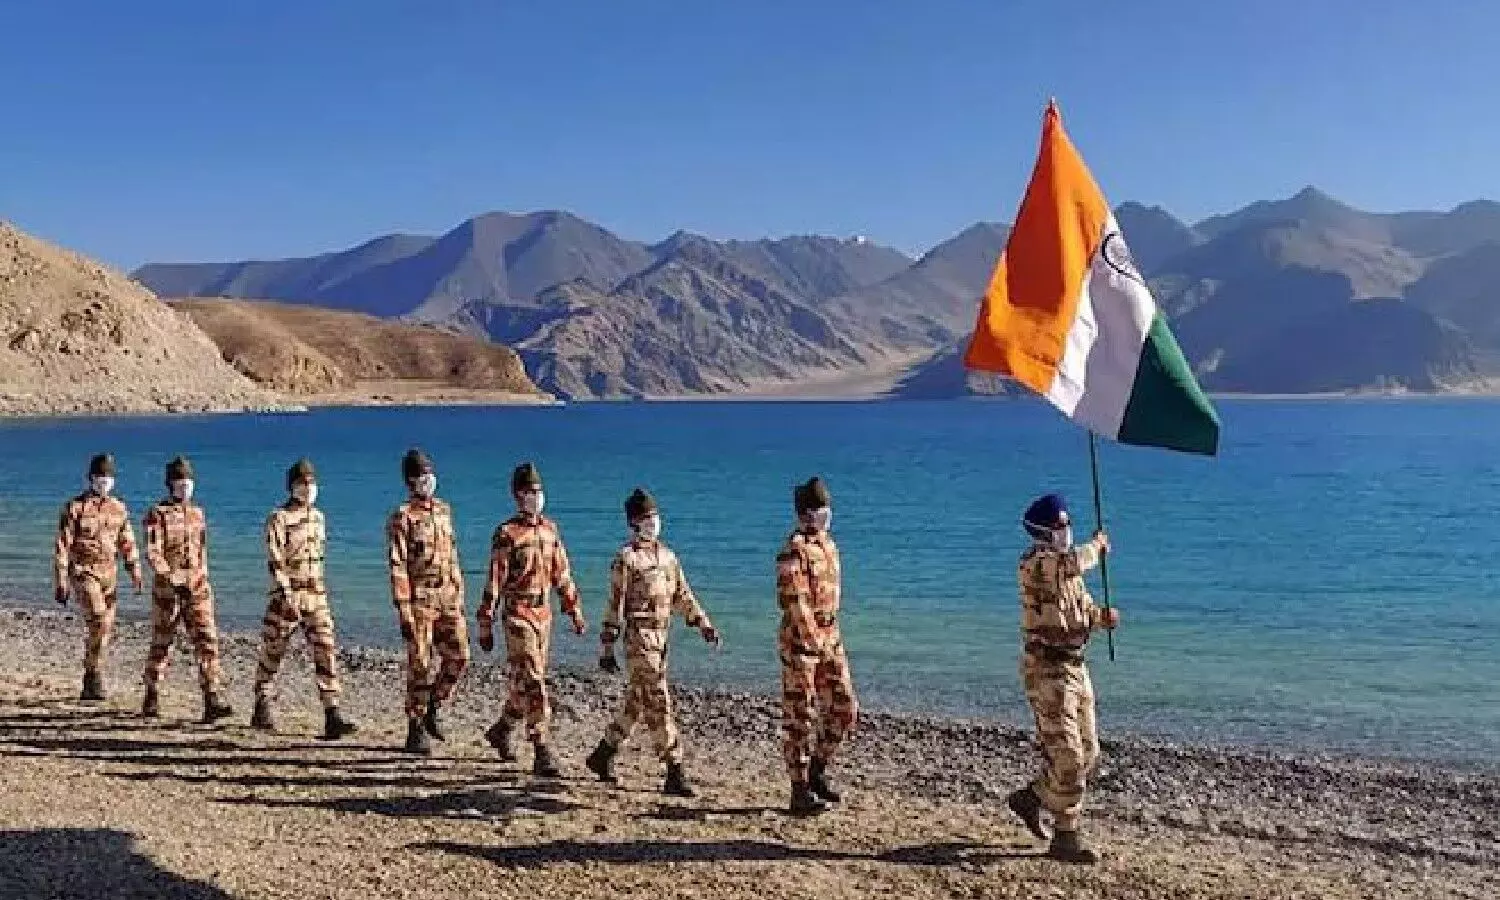 Peace will be restored by early settlement of remaining issues of tension on Eastern Ladakh